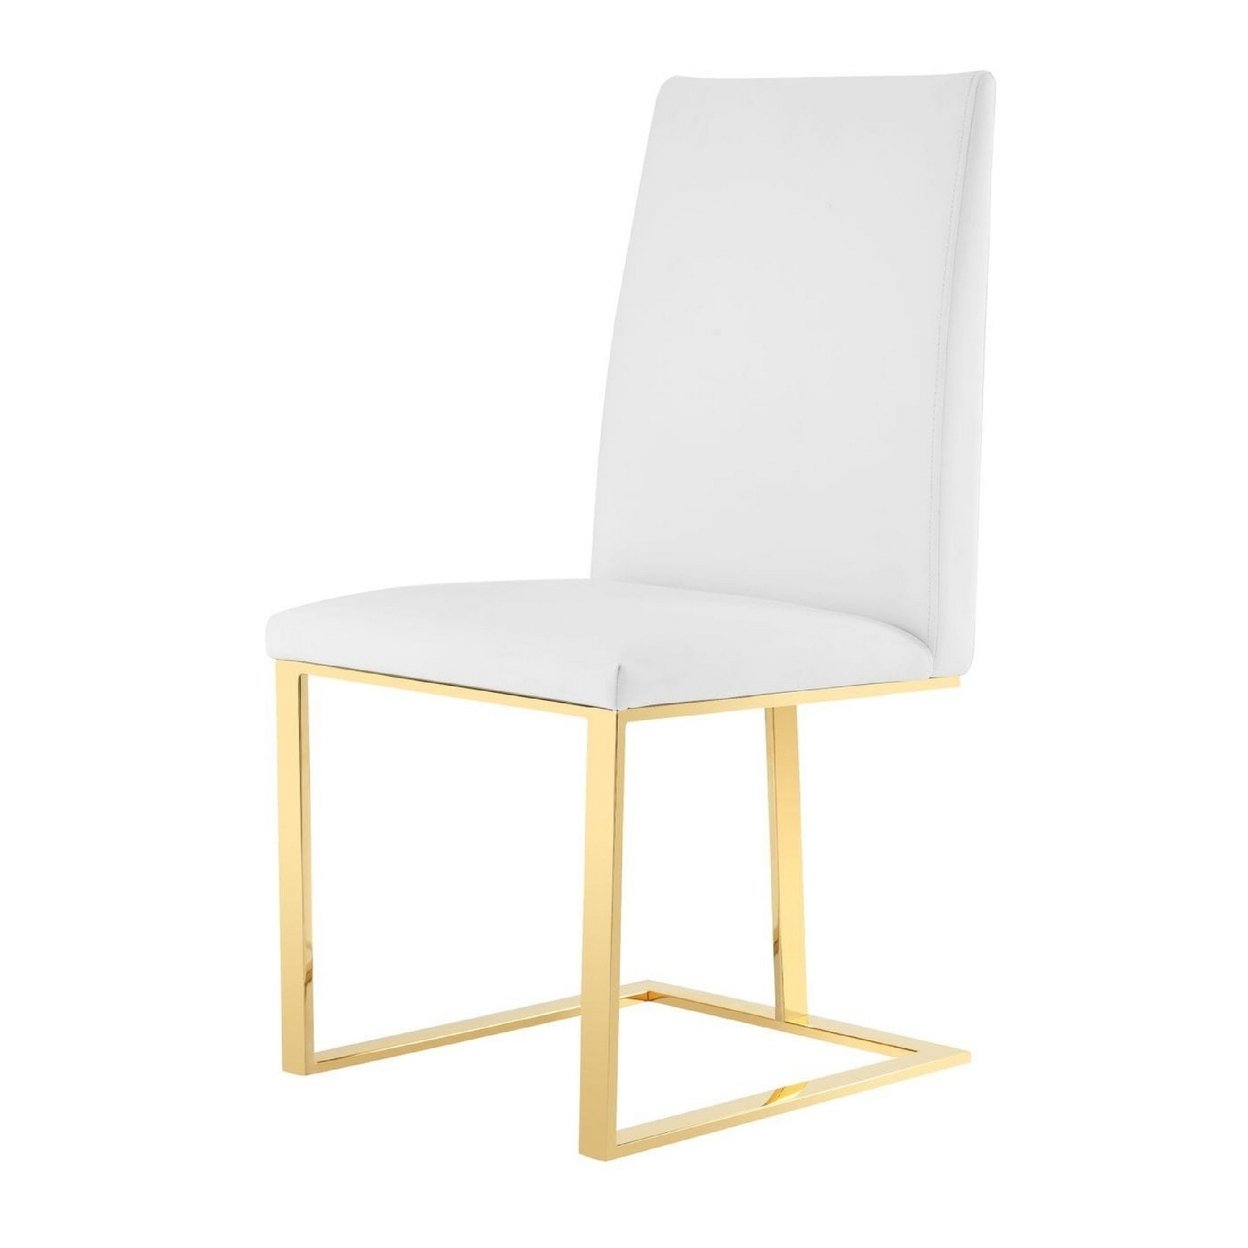 Cid 21 Inch Modern Dining Chair, Stainless Steel Base, Faux Leather, White- Saltoro Sherpi